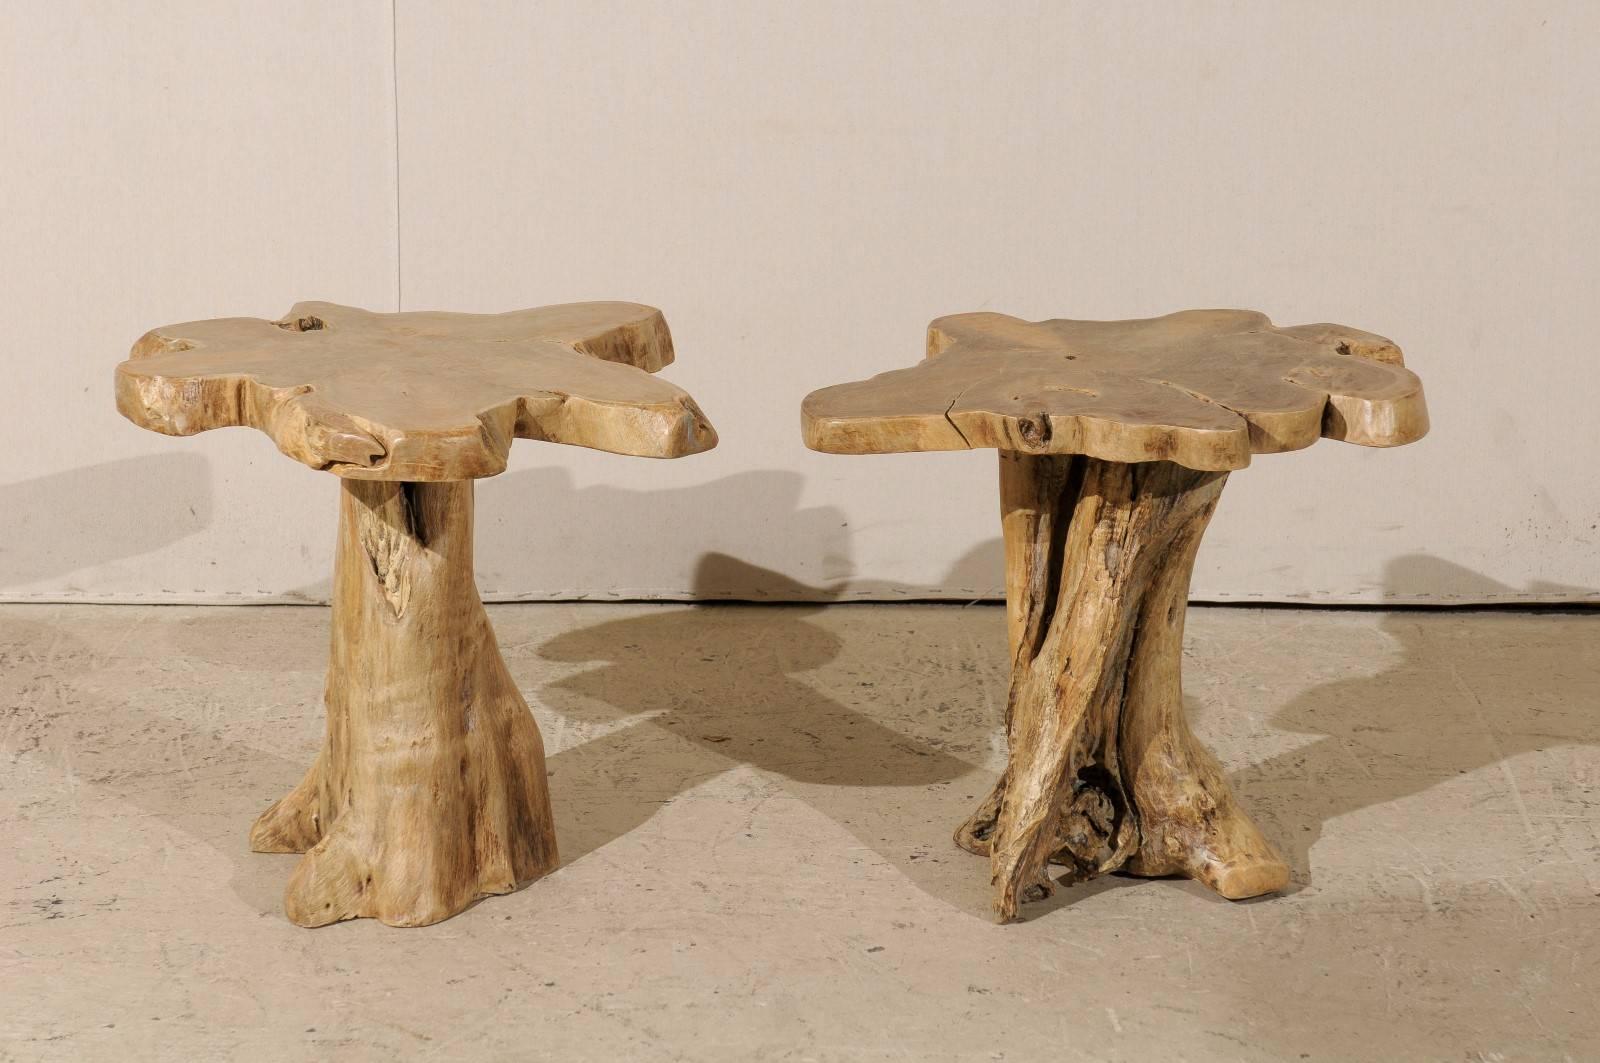 A pair of Indian bleached teak root drinks or side tables. This whimsical pair tables have been made out of recycled teak roots which have been bleached. With their one of a kind shape and natural soft tan / brown color, this pair of Indian drinks